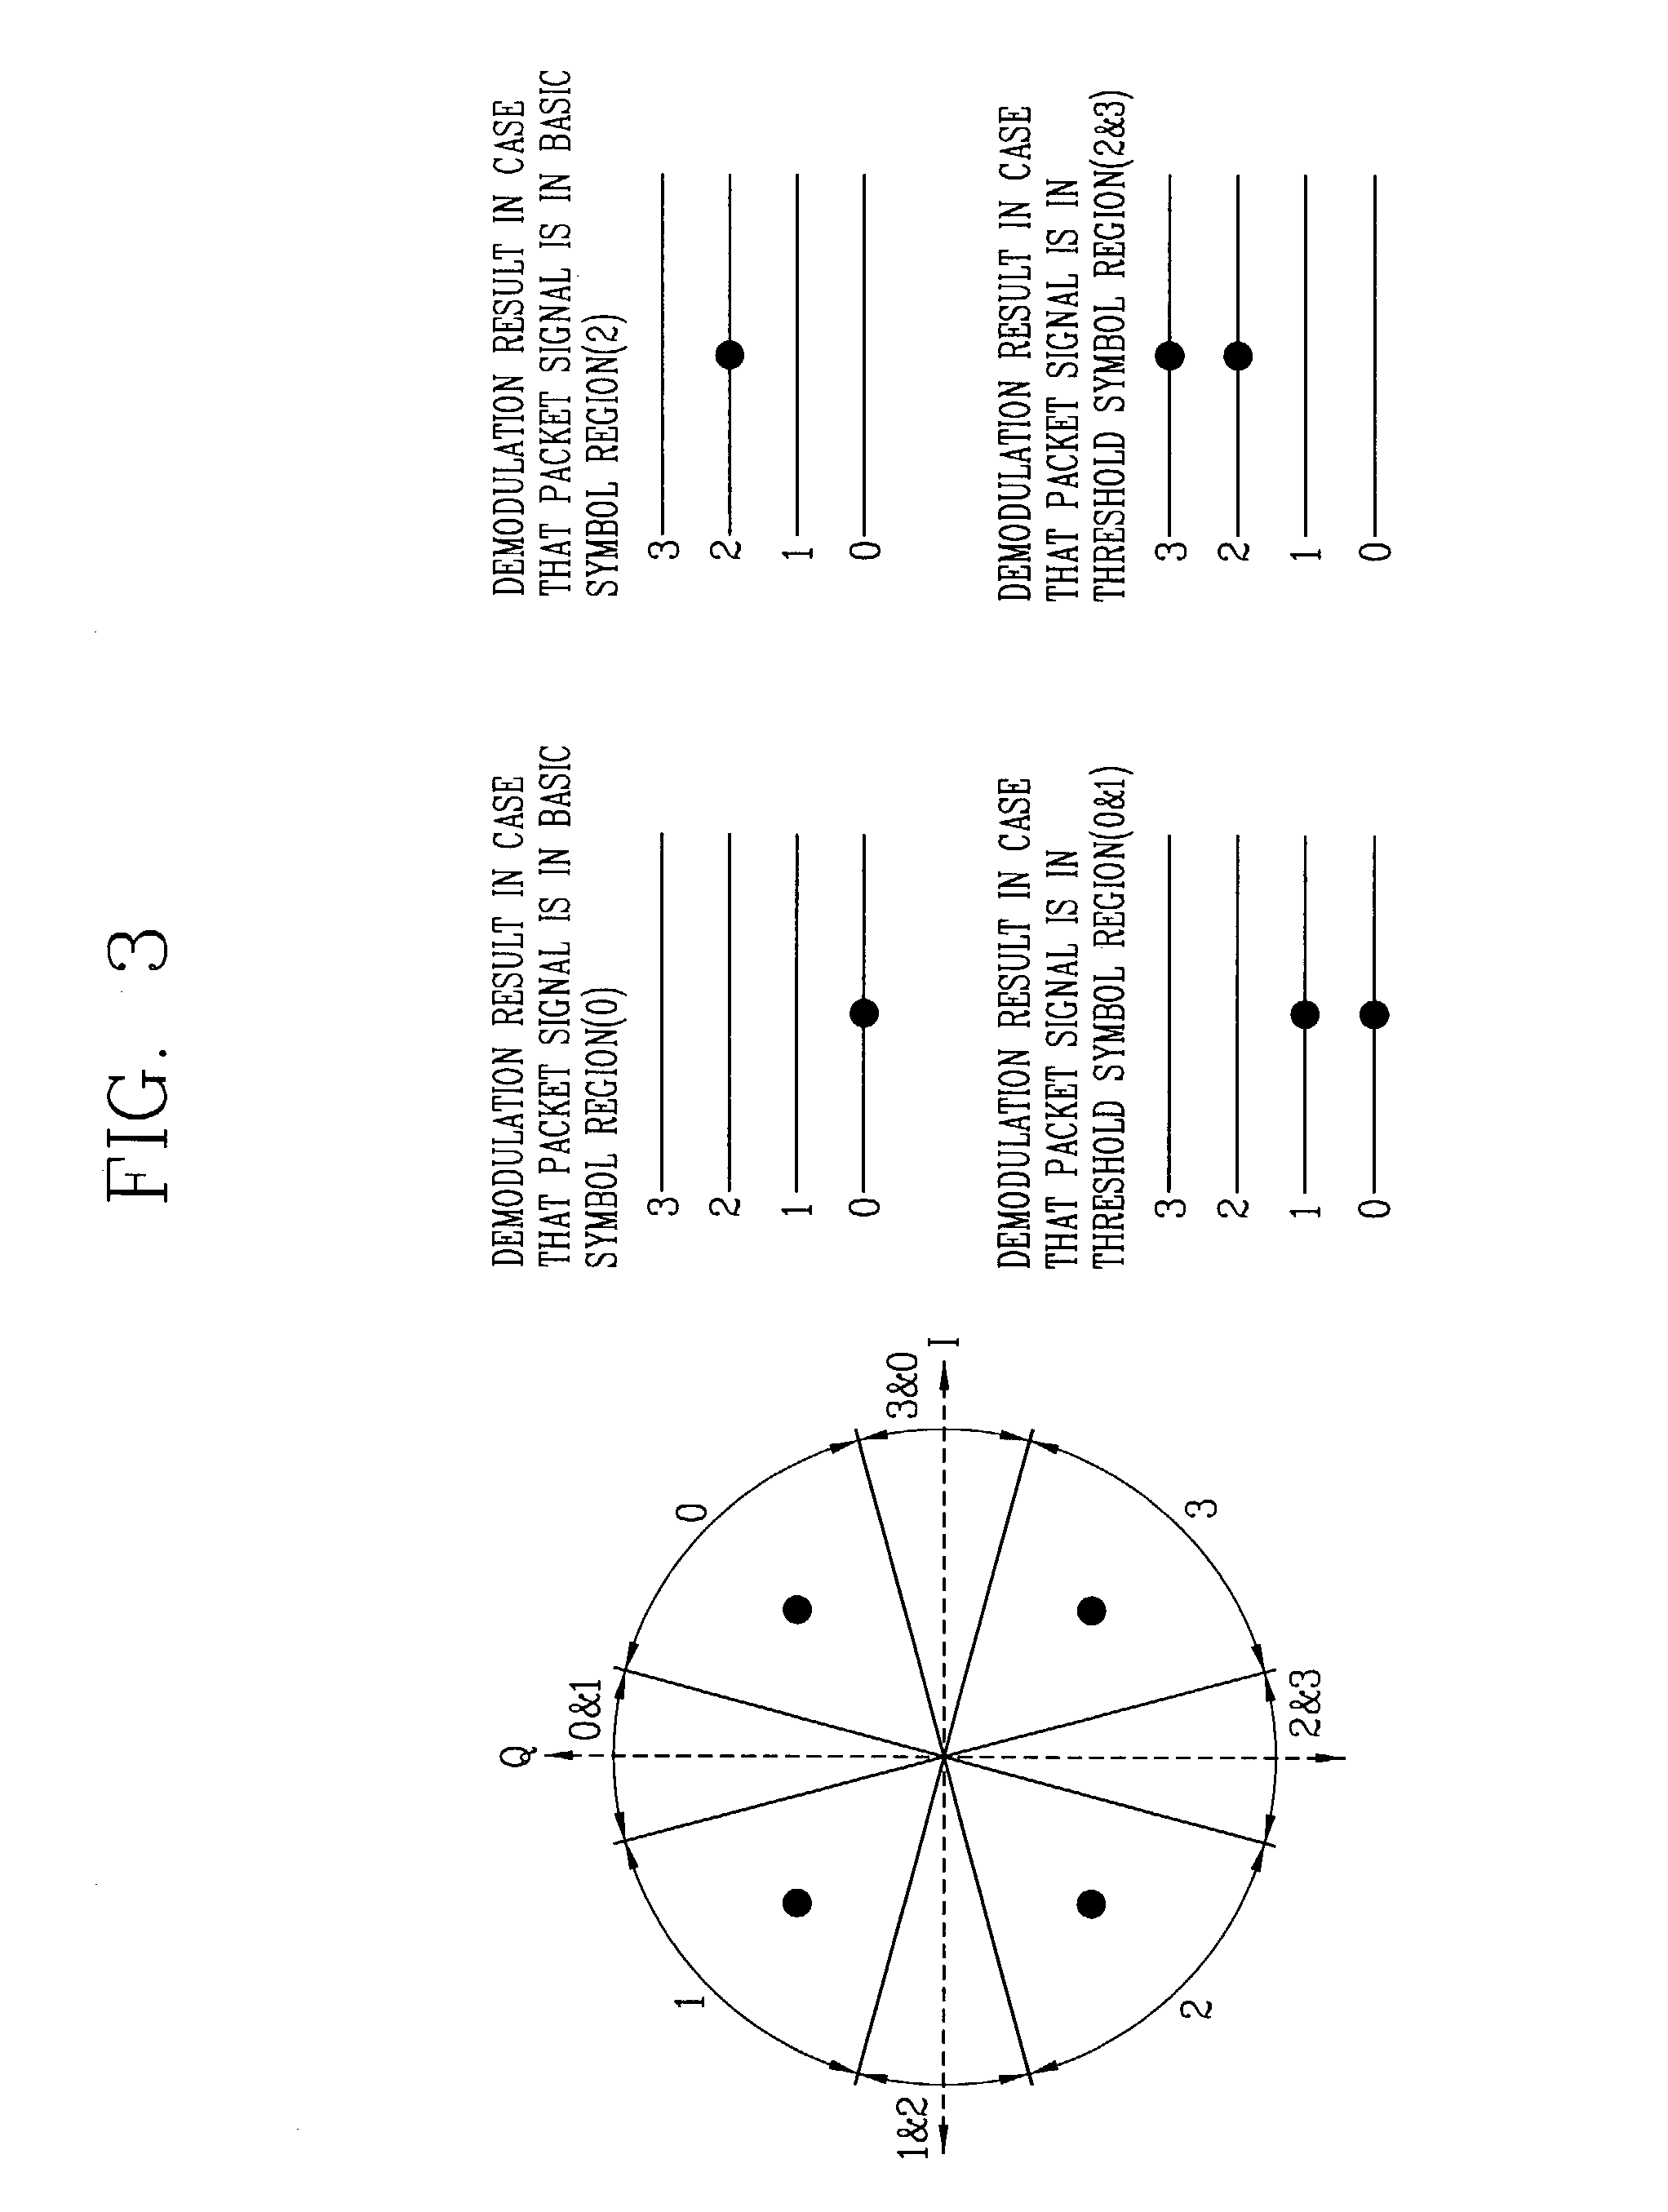 Logical and operation diversity combining method